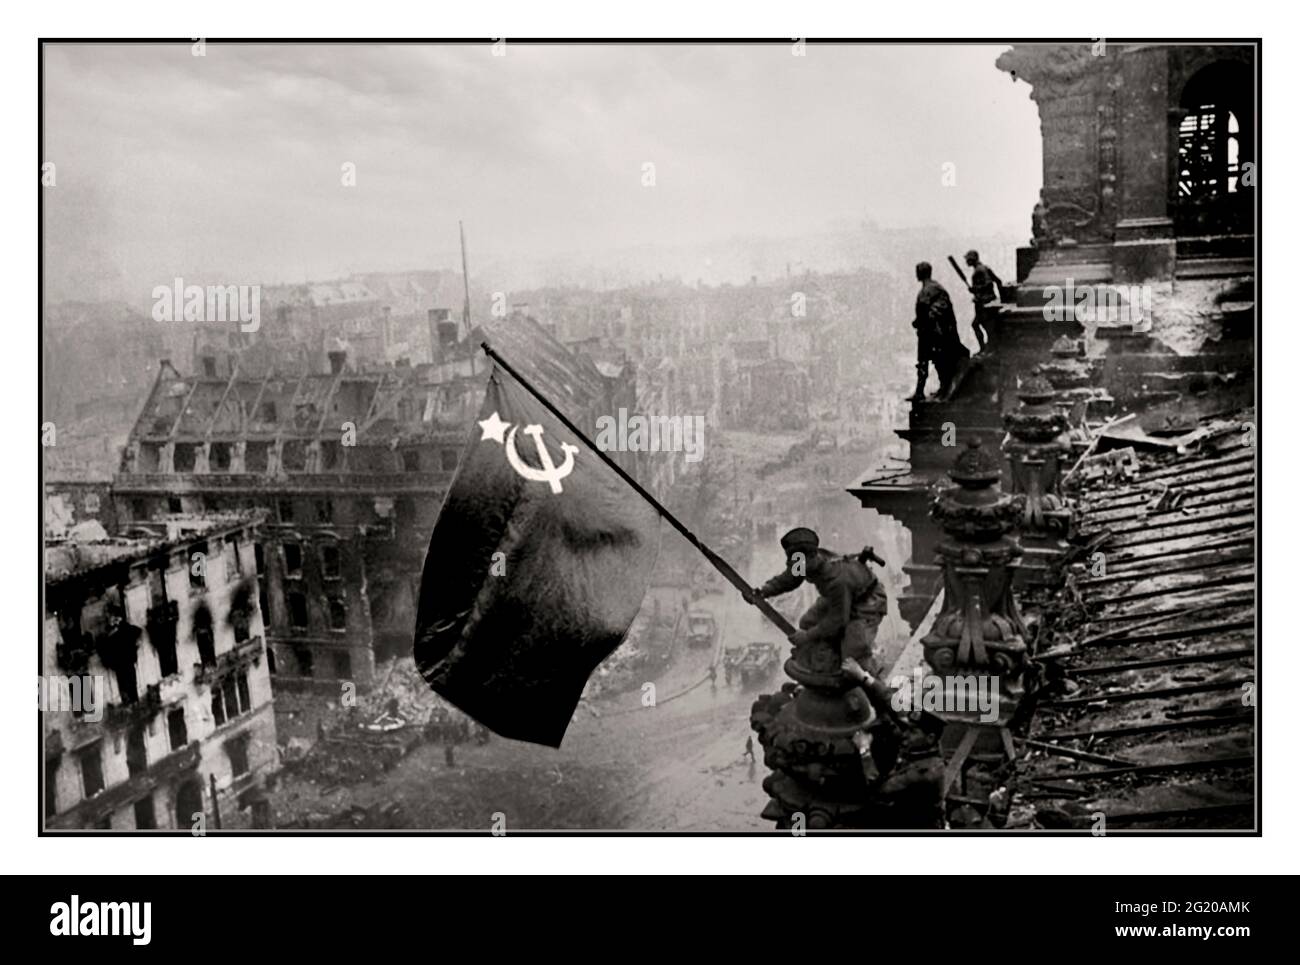 RUSSIAN ARMY BERLIN SOVIET FLAG OVER NAZI REICHSTAG World War II Germany Iconic image of raising a Russian Soviet flag over the Reichstag, an historic World War II photograph, taken during the Battle of Berlin on 2 May 1945. It shows Meliton Kantaria and Mikhail Yegorov raising the Hammer and Sickle flag over the Berlin Reichstag Berlin Germany WW2 Red Army Soviet Soldiers Hammer and Sickle Soviet flag Nazi Headquarters Reichstag, Berlin Germany 1945 Stock Photo